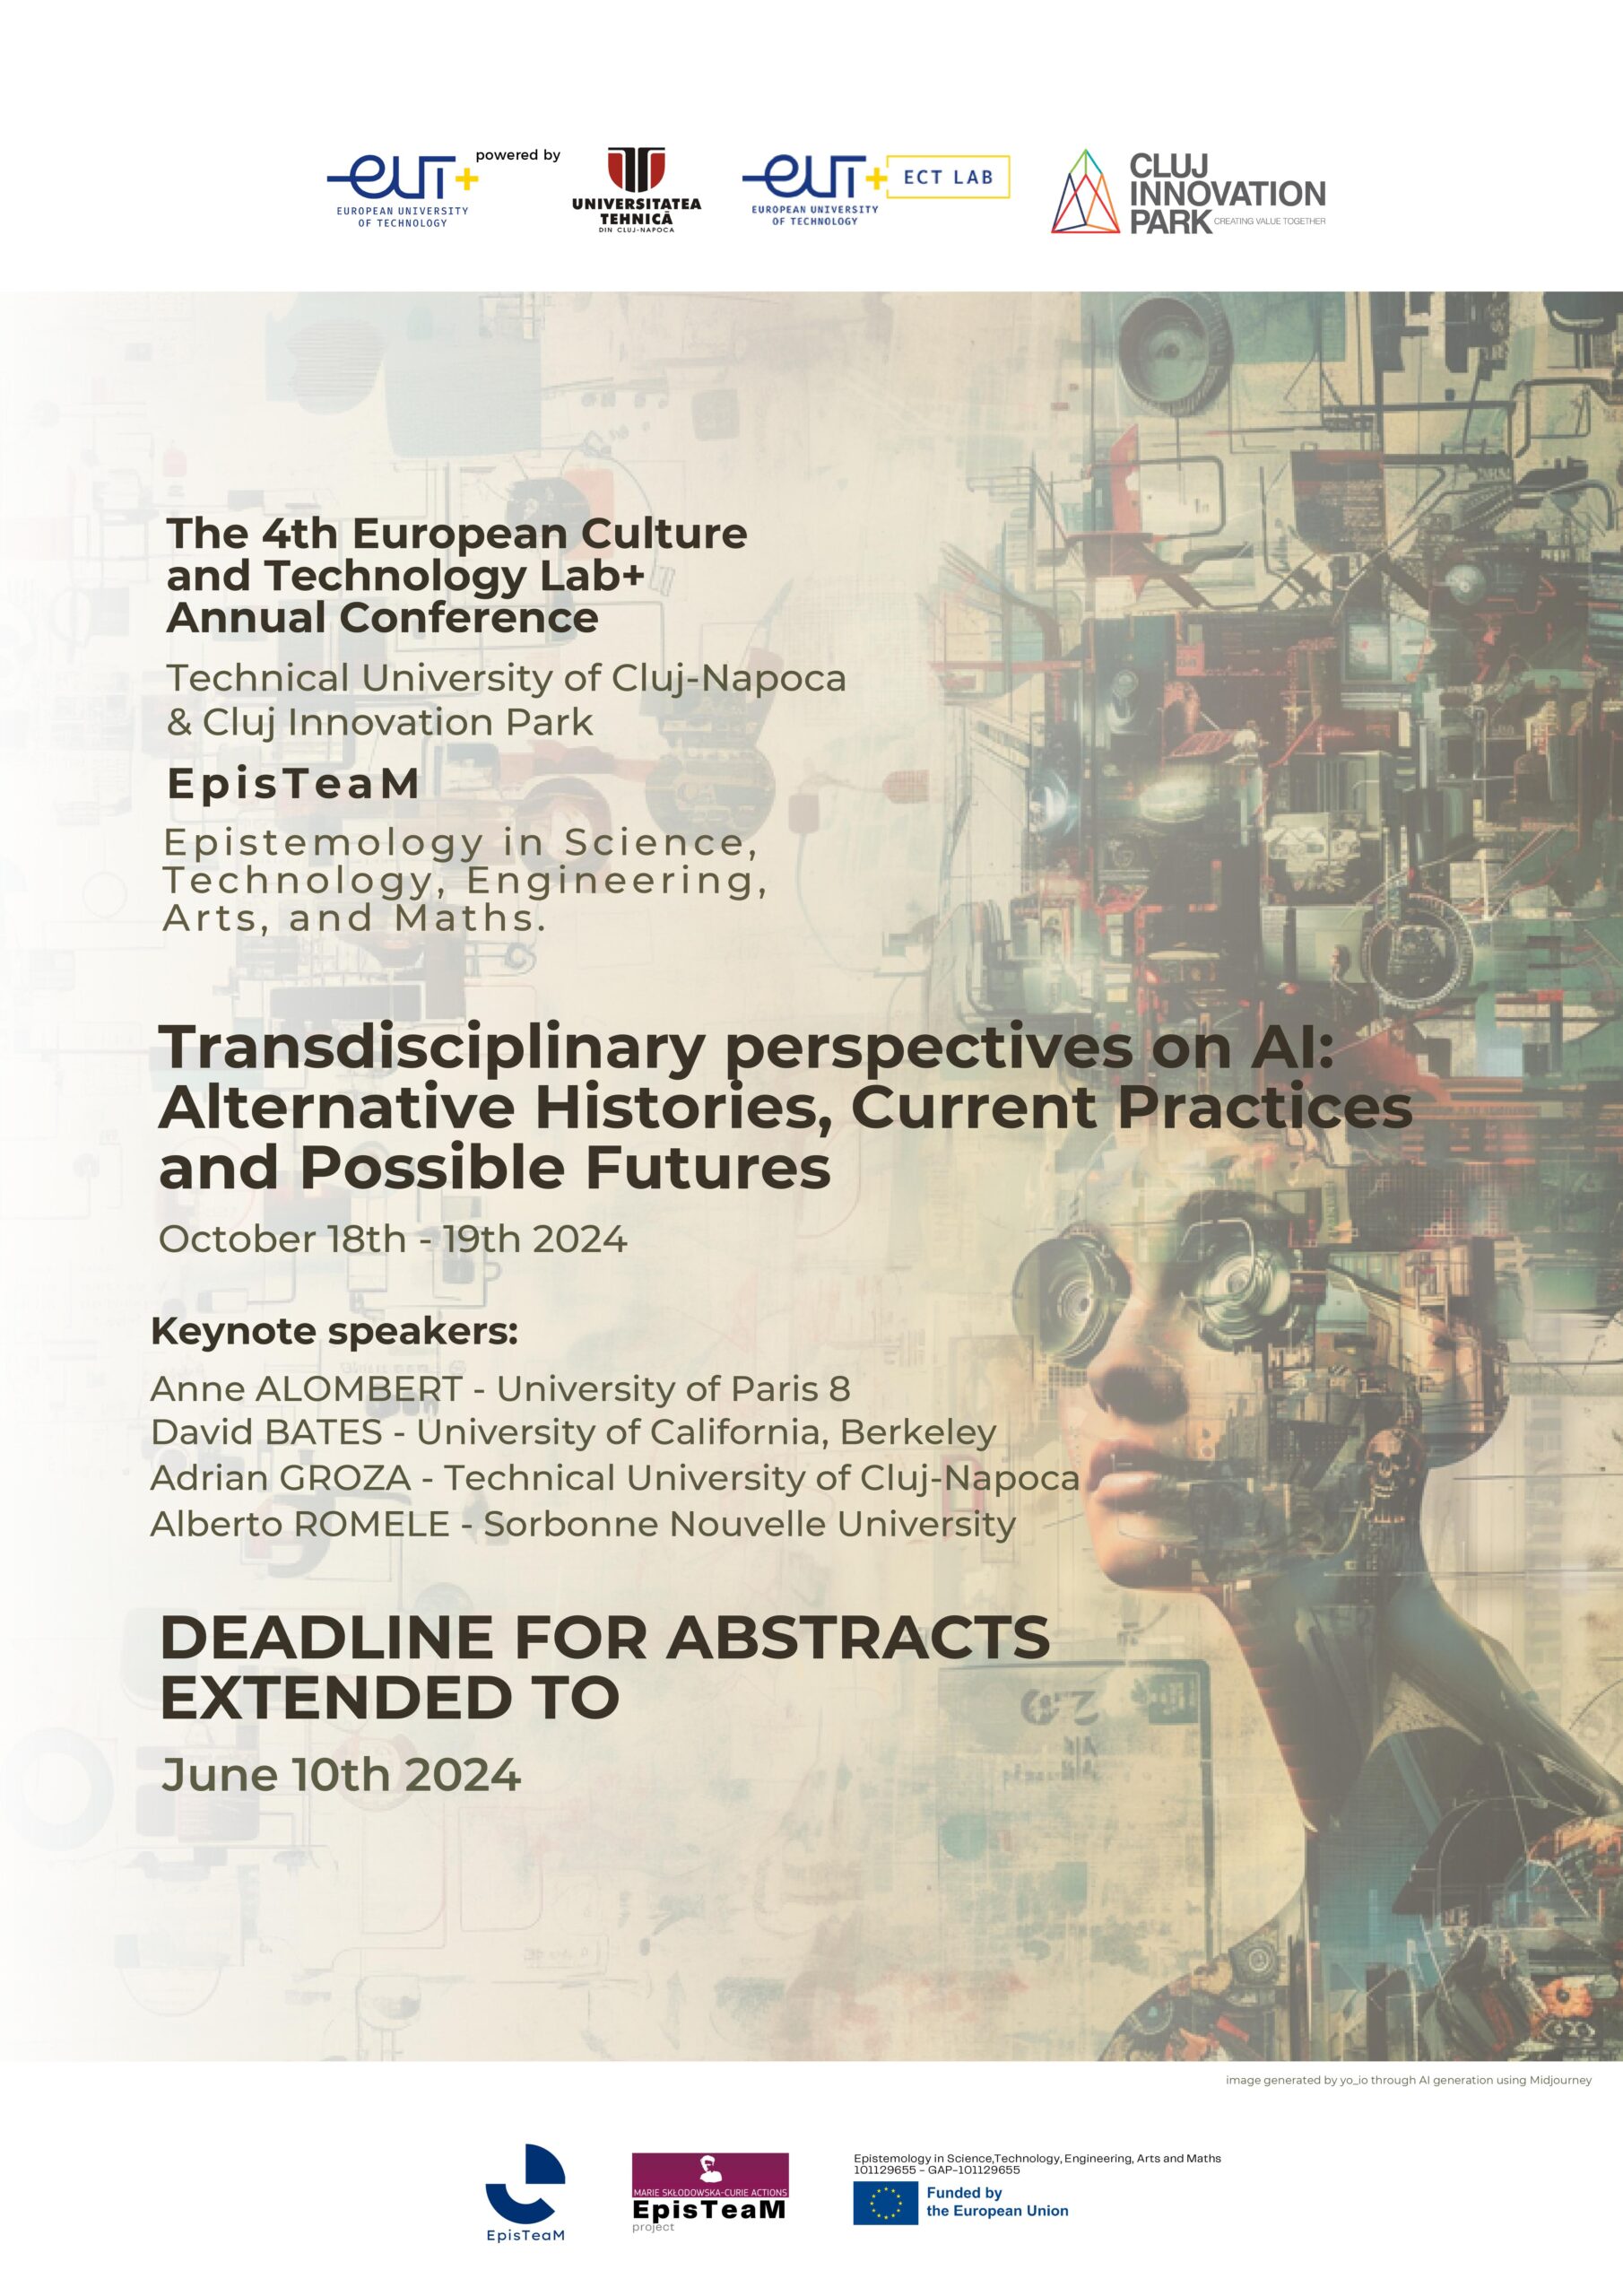 Deadline extended to June 10th  – Transdisciplinary perspectives on AI: Alternative Histories, Current Practices and Possible Futures